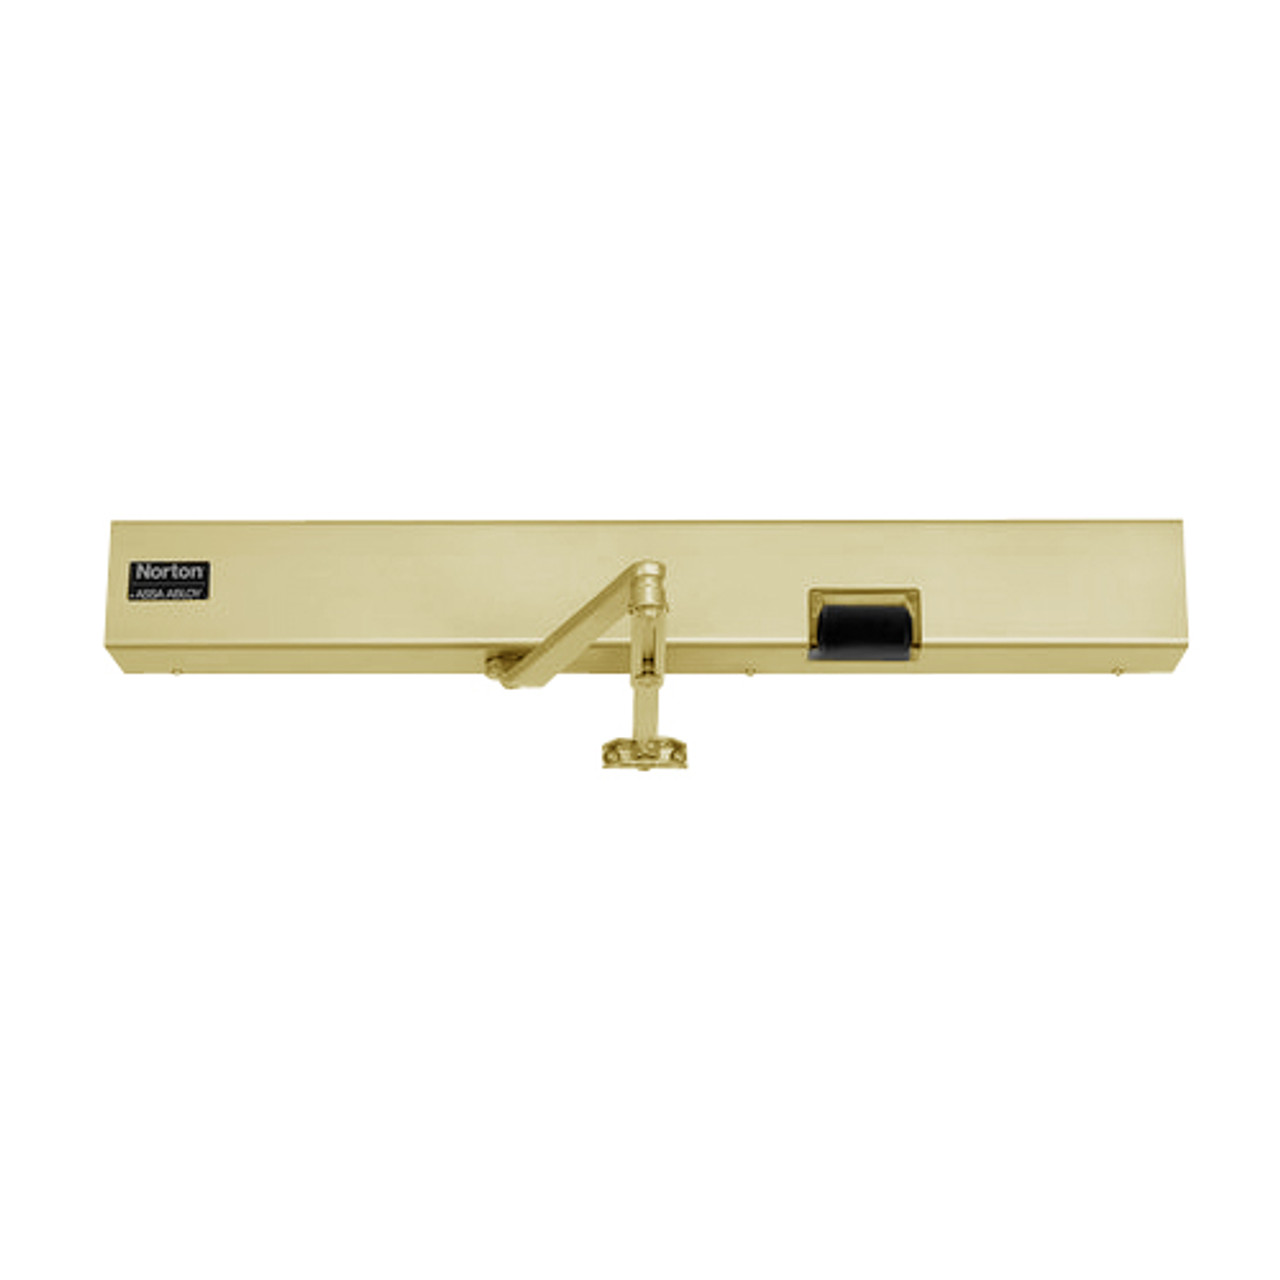 7133SZ-LH-120VAC-696 Norton 7100SZ Series Safe Zone Multi-Point Closer/Holder with Motion Sensor and Push Side Double Lever 13-1/2 inch Main Arm in Gold Finish